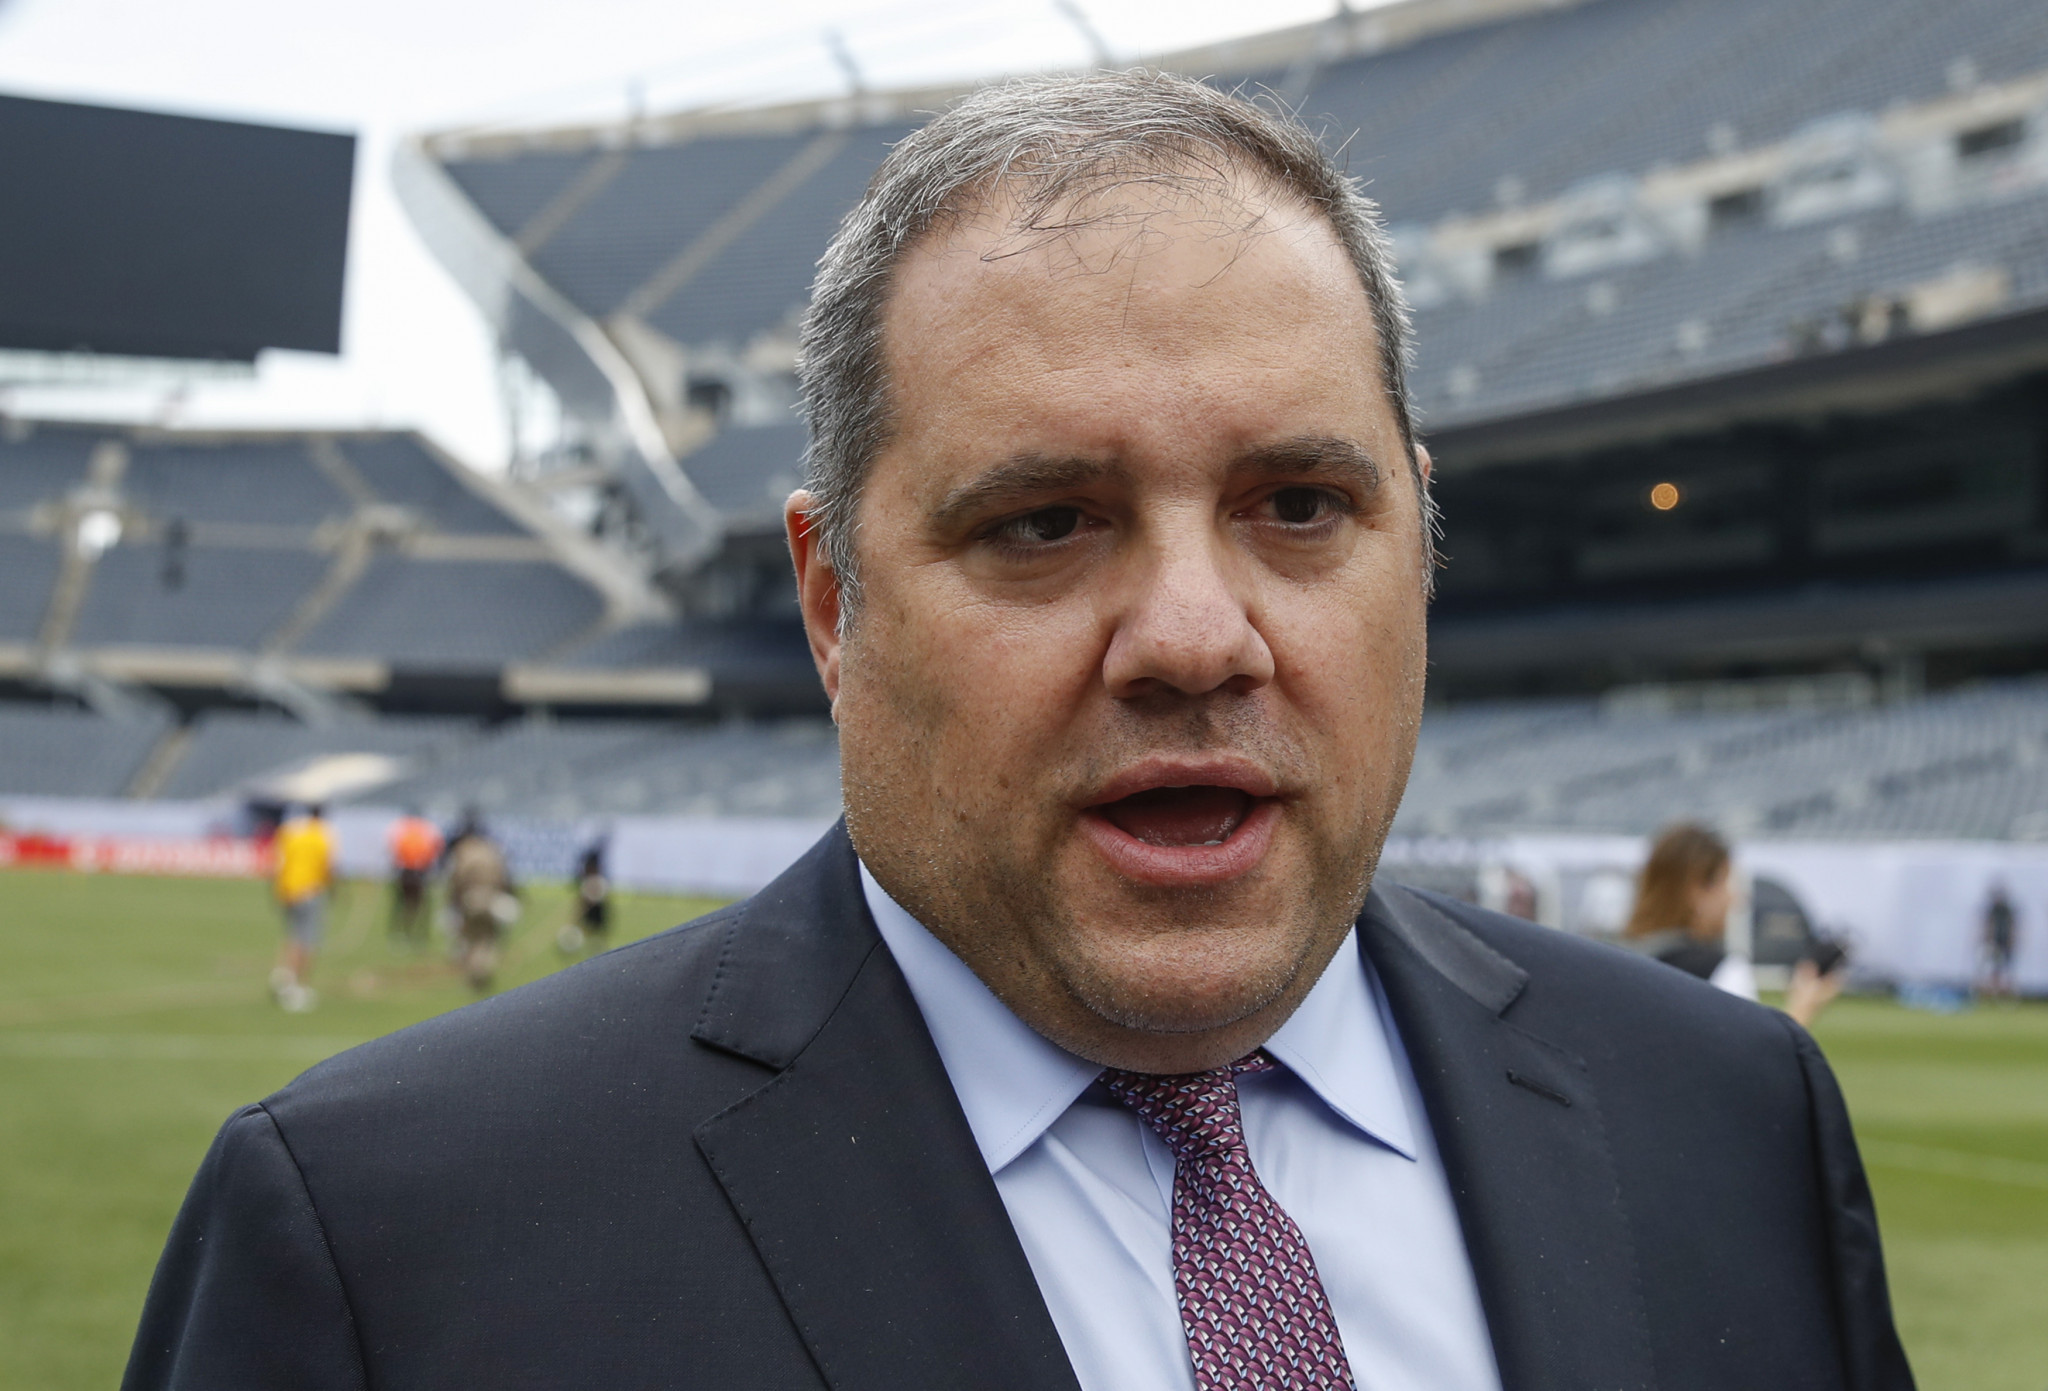 Montagliani latest football official re-elected unopposed as CONCACAF President